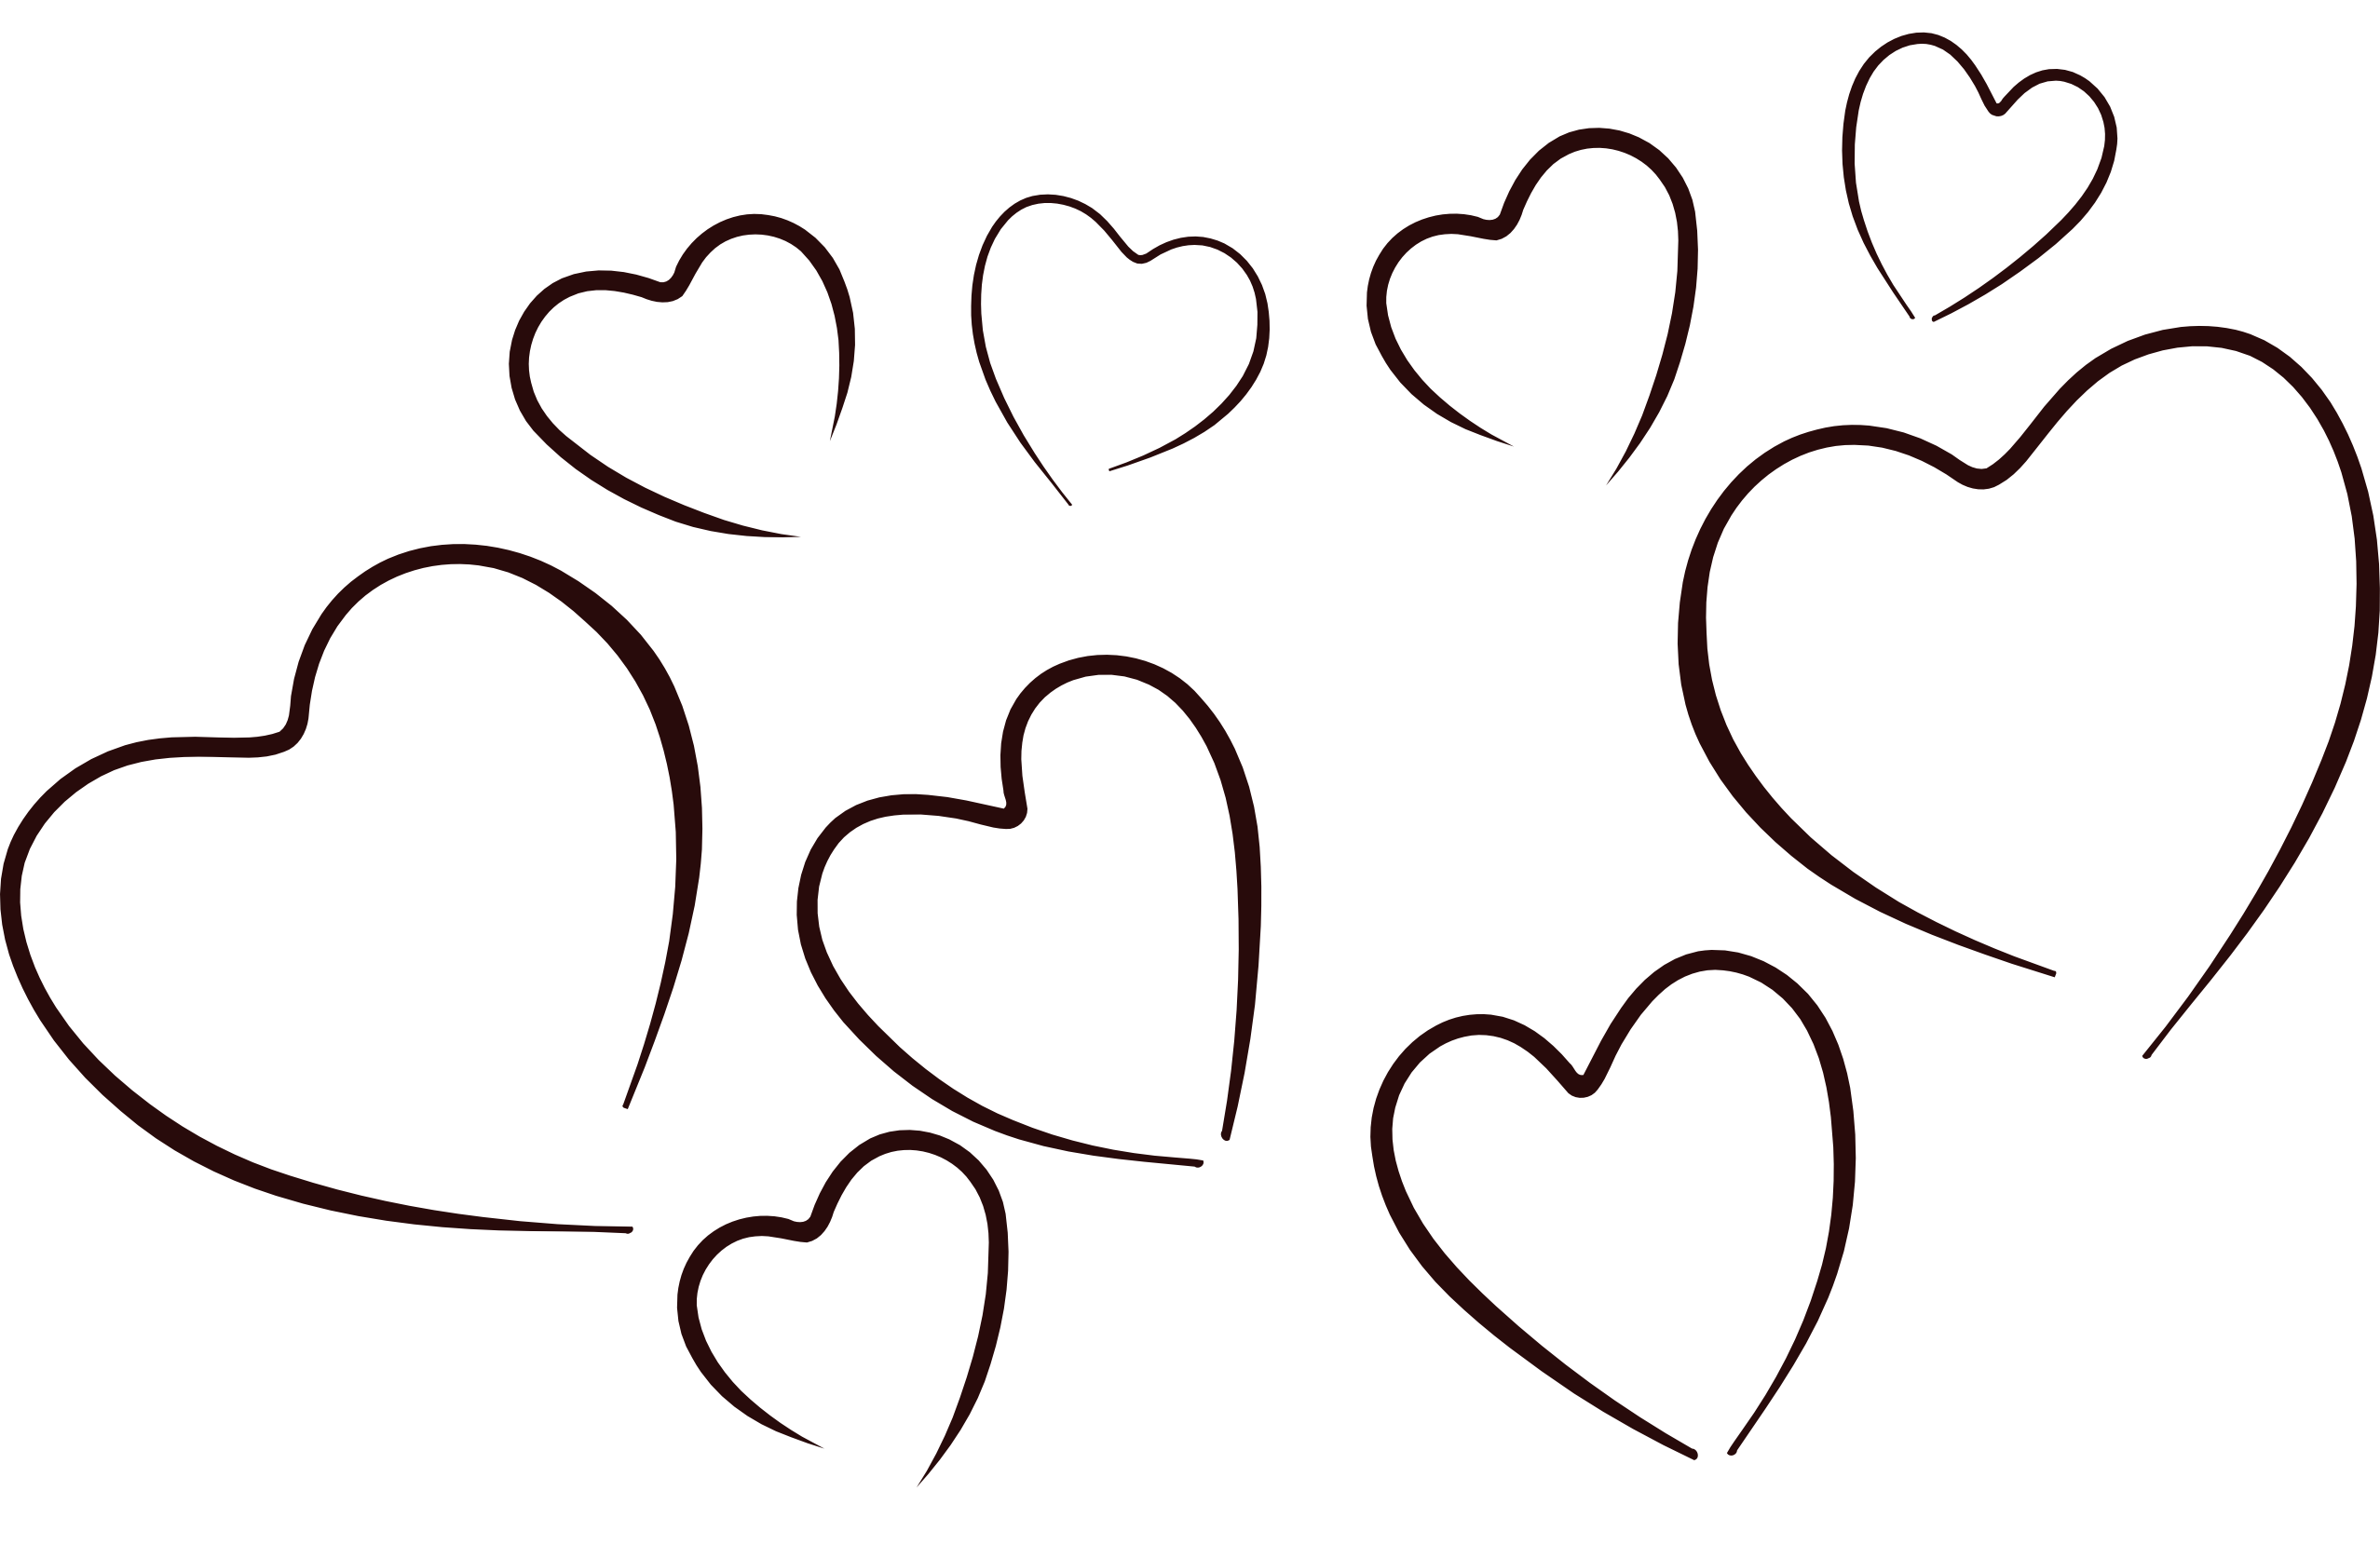 Heart Silhouette Vector - Clipart library